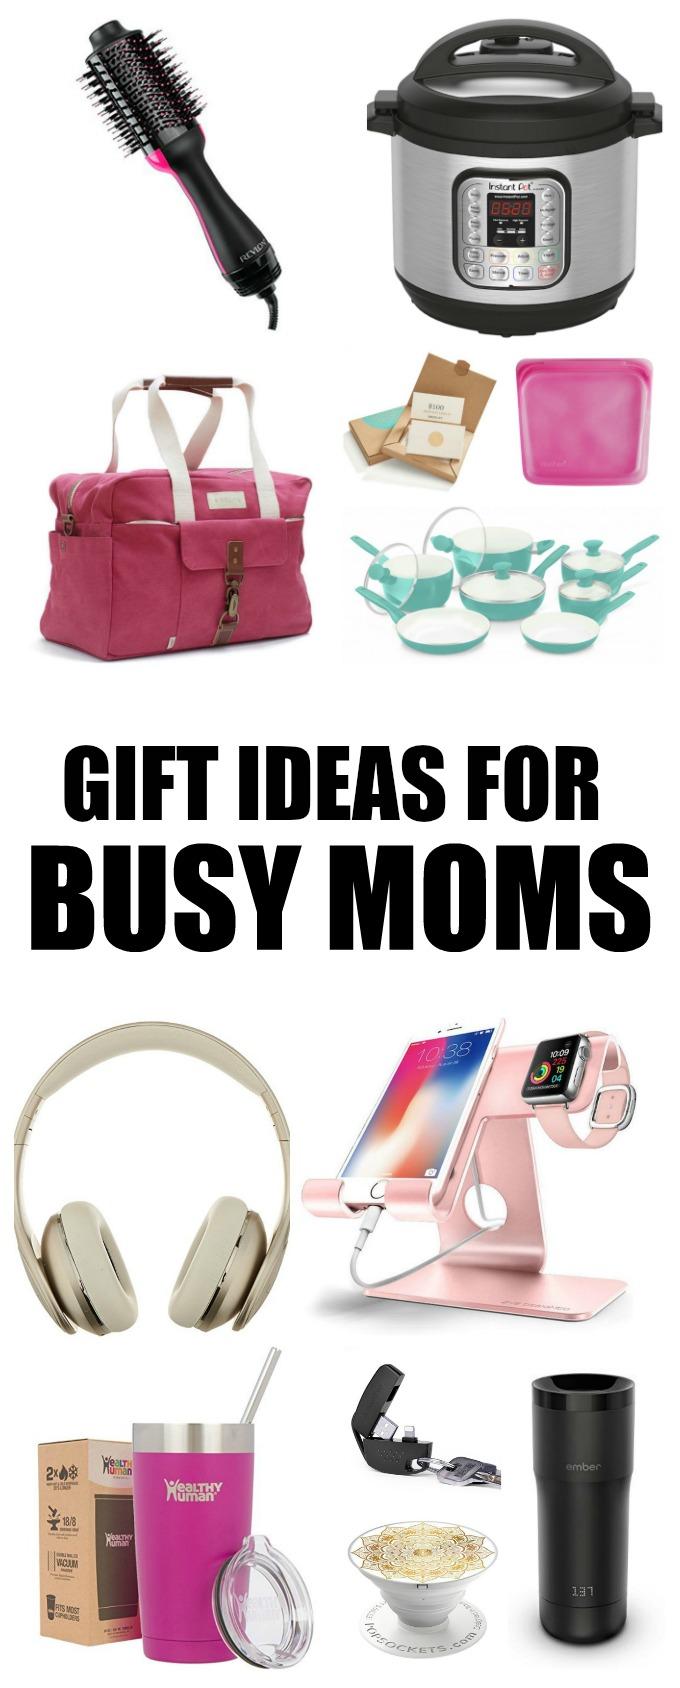 These Gift Ideas For Busy Moms are the perfect holiday presents for all the moms in your life this Christmas holiday!